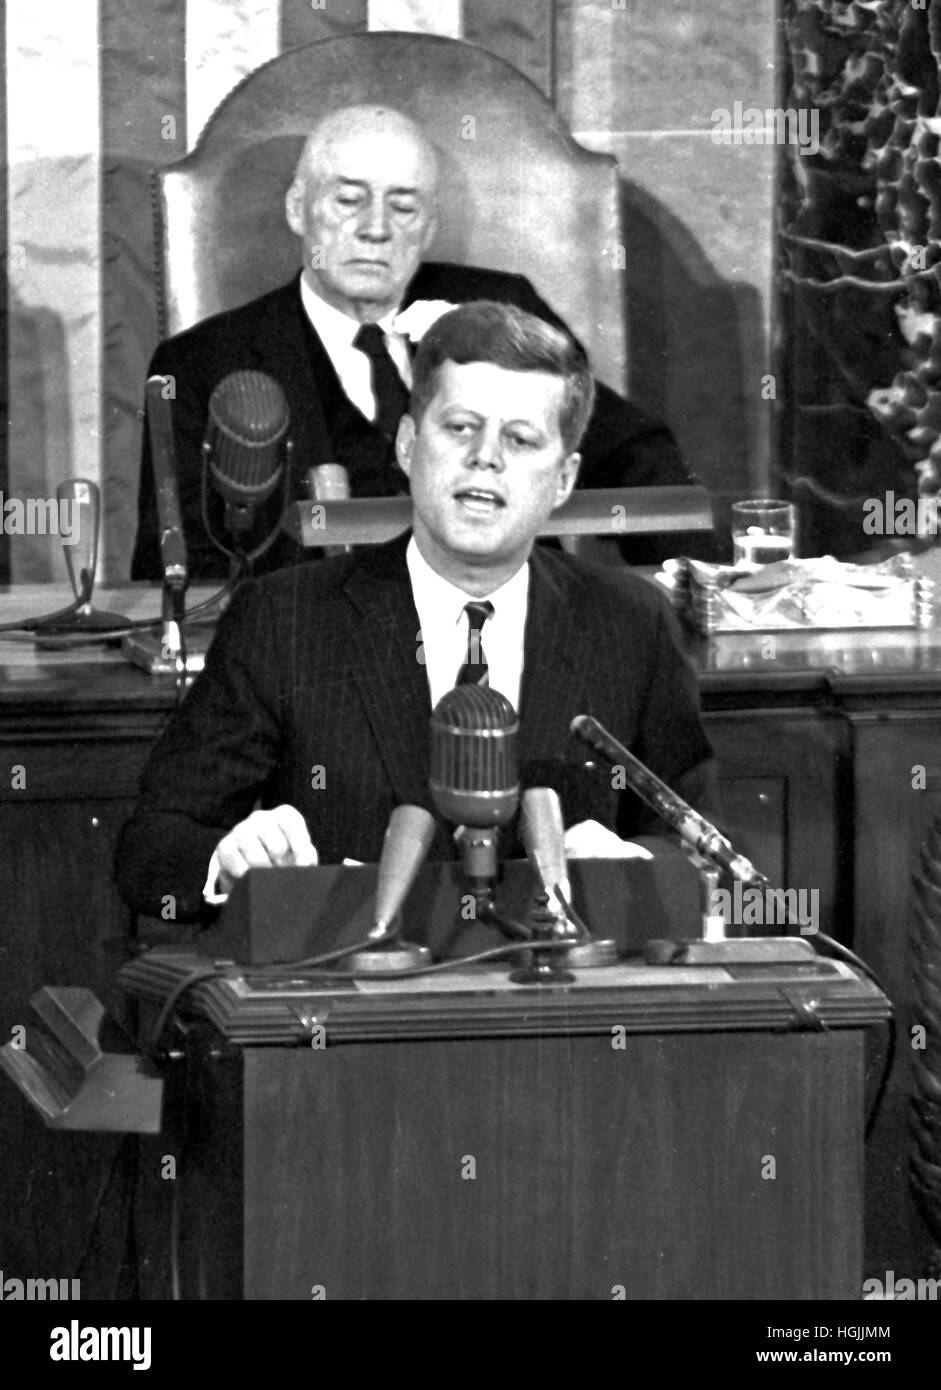 United States President John F. Kennedy outlined his vision for manned exploration of space to a Joint Session of the United States Congress, in Washington, DC on May 25, 1961 when he declared, '.I believe this nation should commit itself to achieving the goal, before this decade is out, of landing a man on the Moon and returning him safely to the Earth.' This goal was achieved when astronaut Neil A. Armstrong became the first human to set foot upon the Moon at 10:56 p.m. EDT, July 20, 1969. Shown in the background is Speaker of the House Sam T. Rayburn (Democrat of Texas). Credit: Arnie Sac Stock Photo